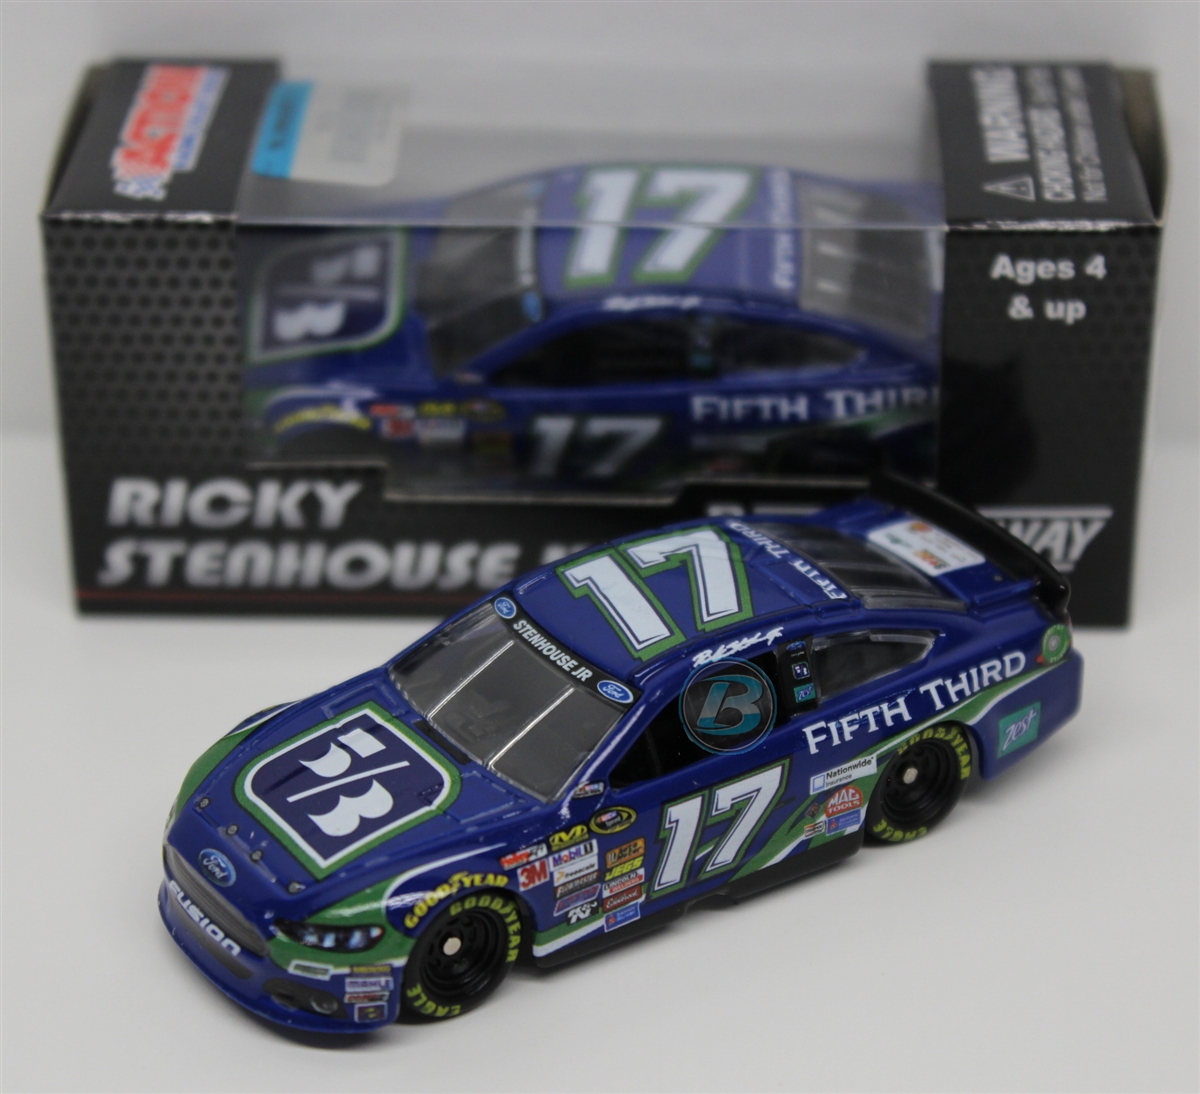 NEW 2017 RICKY STENHOUSE #17 FIFTH THIRD BANK 1/64 CAR